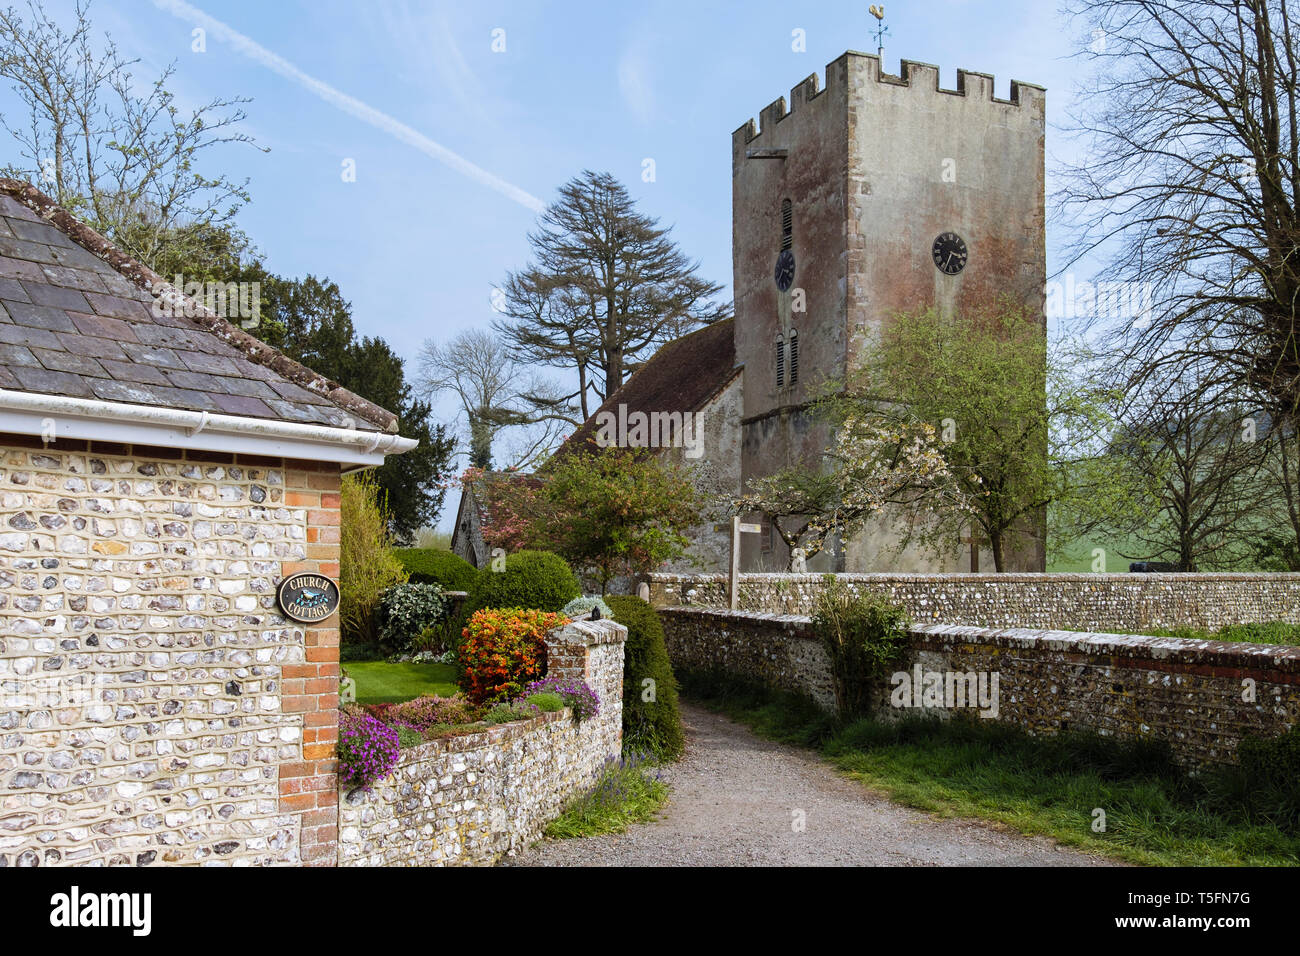 Path to St Mary's country parish church with clock tower in village of Singleton, Chichester, West Sussex, England, UK, Britain Stock Photo